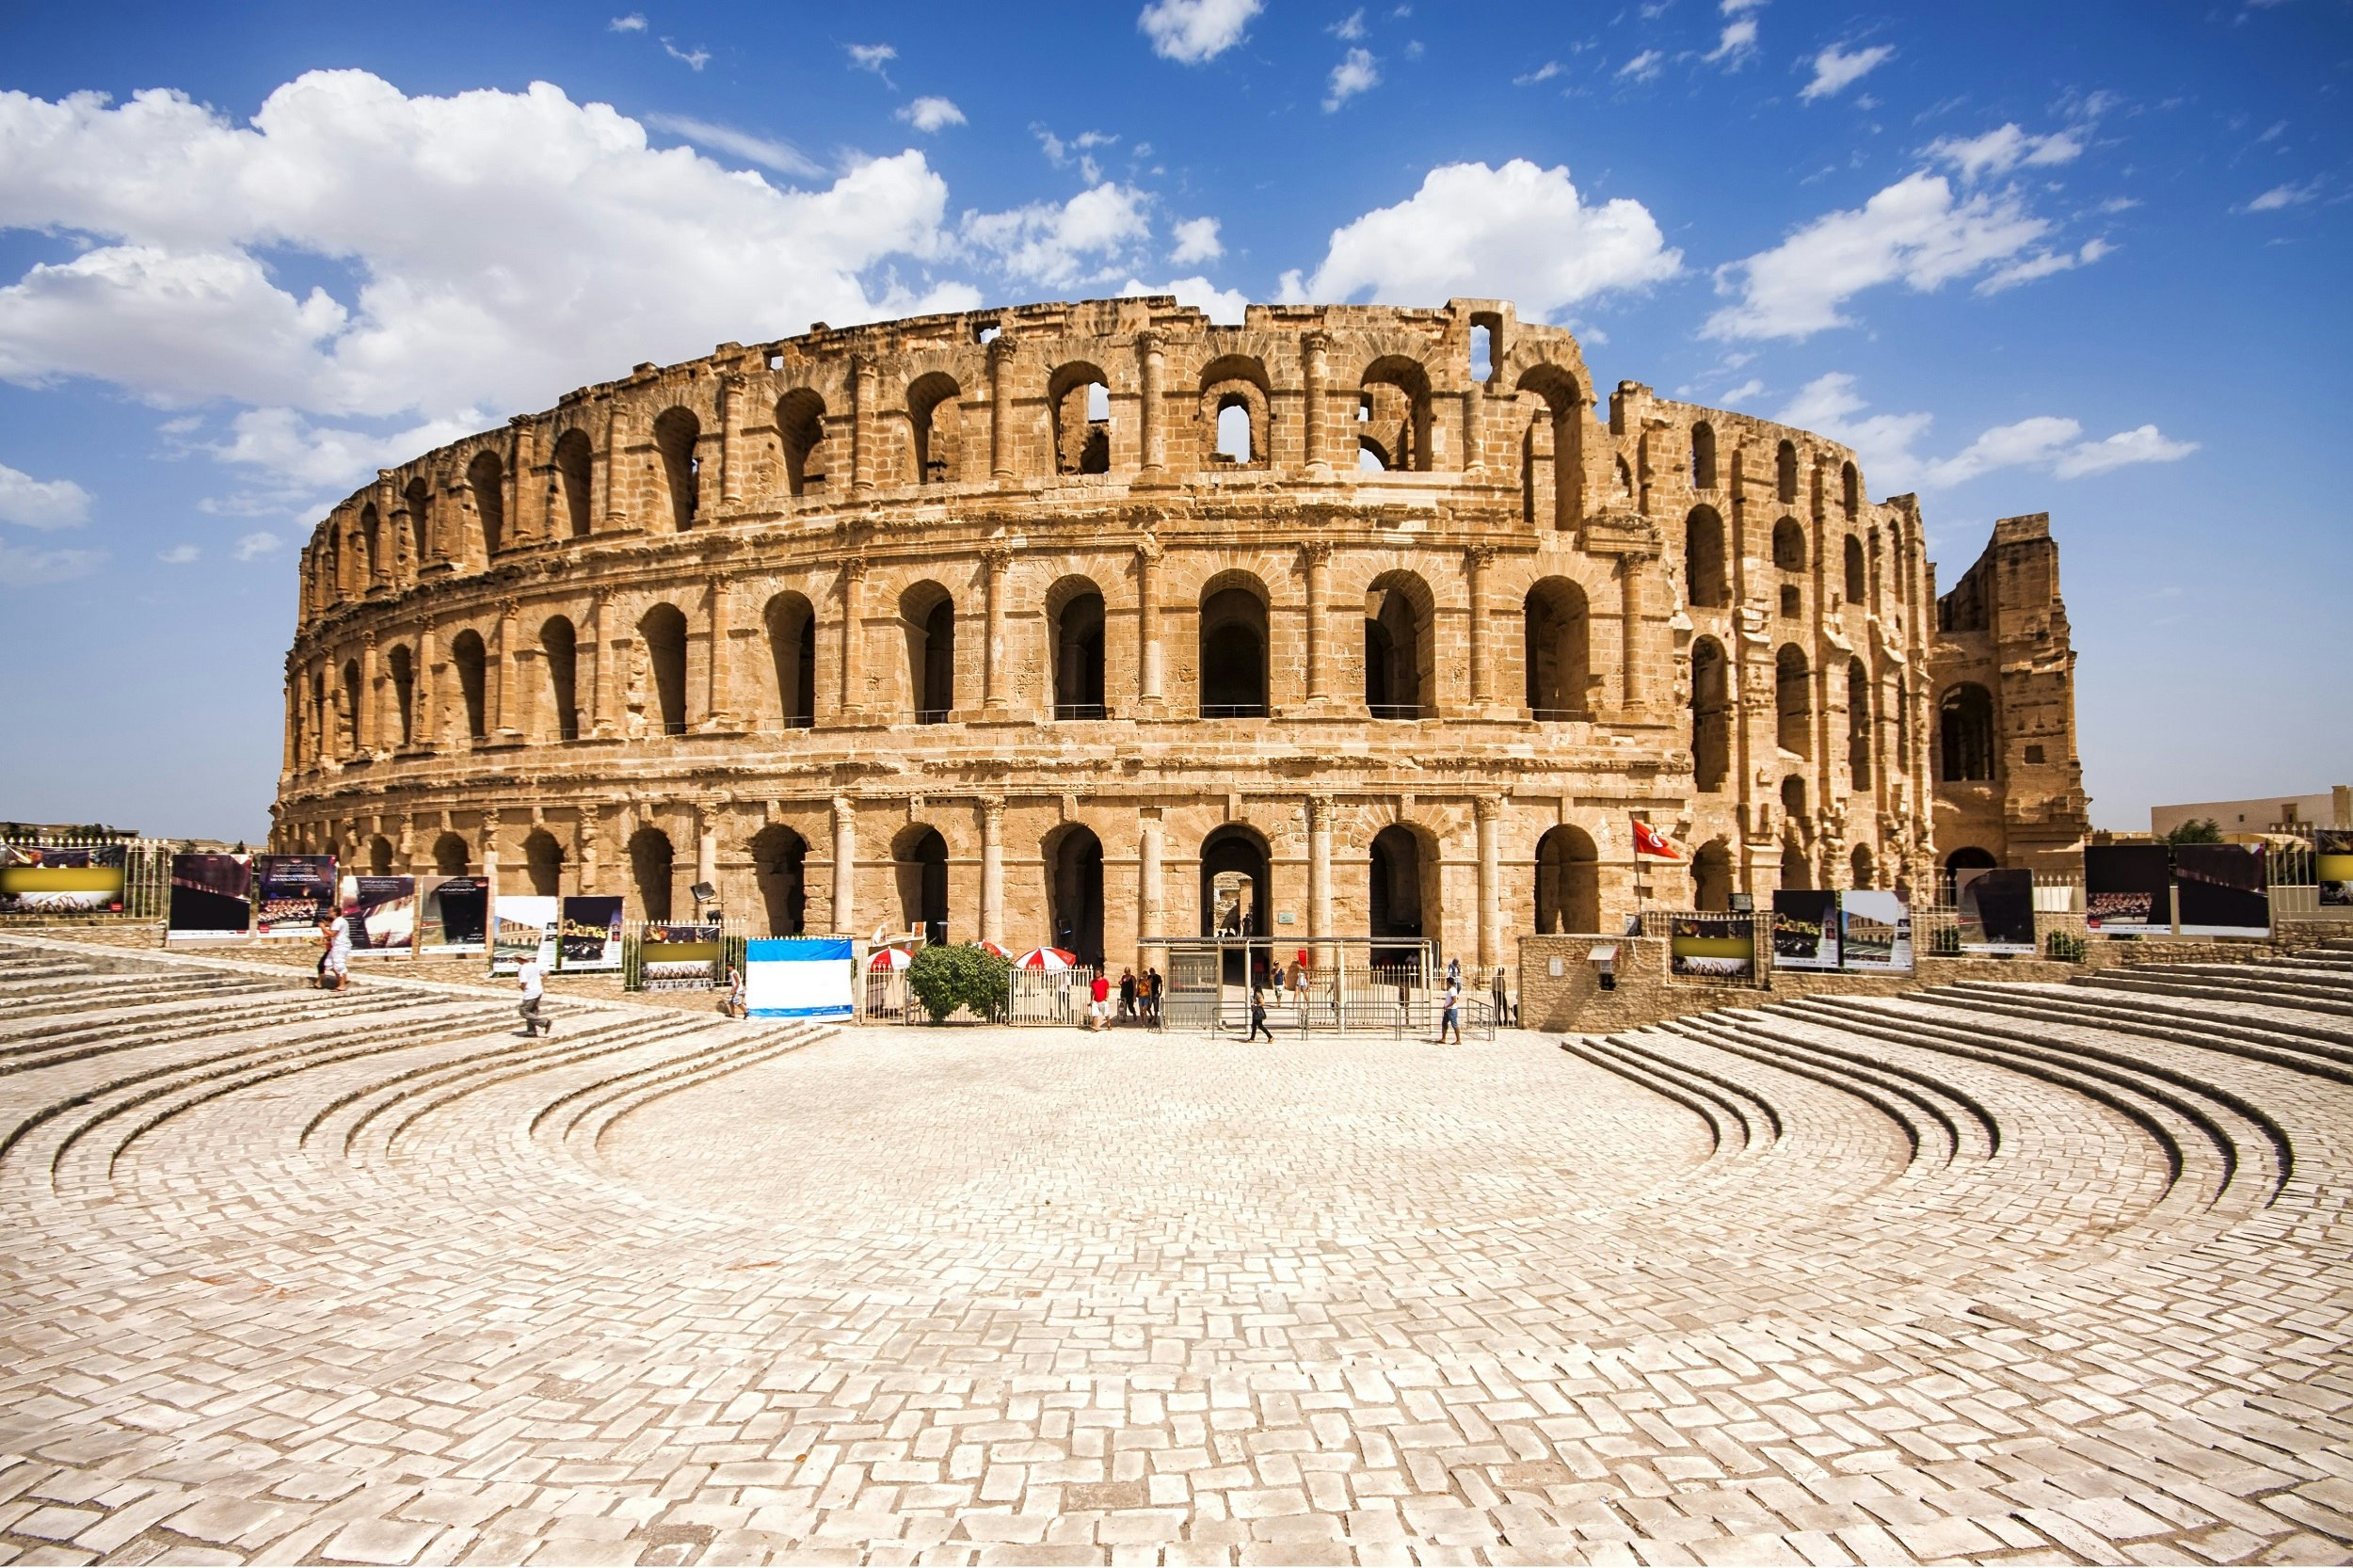 An image looking across a cobbled pavilion, with what looks like Rome's Colosseum rising in the background; El Jem's colosseum is very similar looking to Rome's, and only slightly smaller.